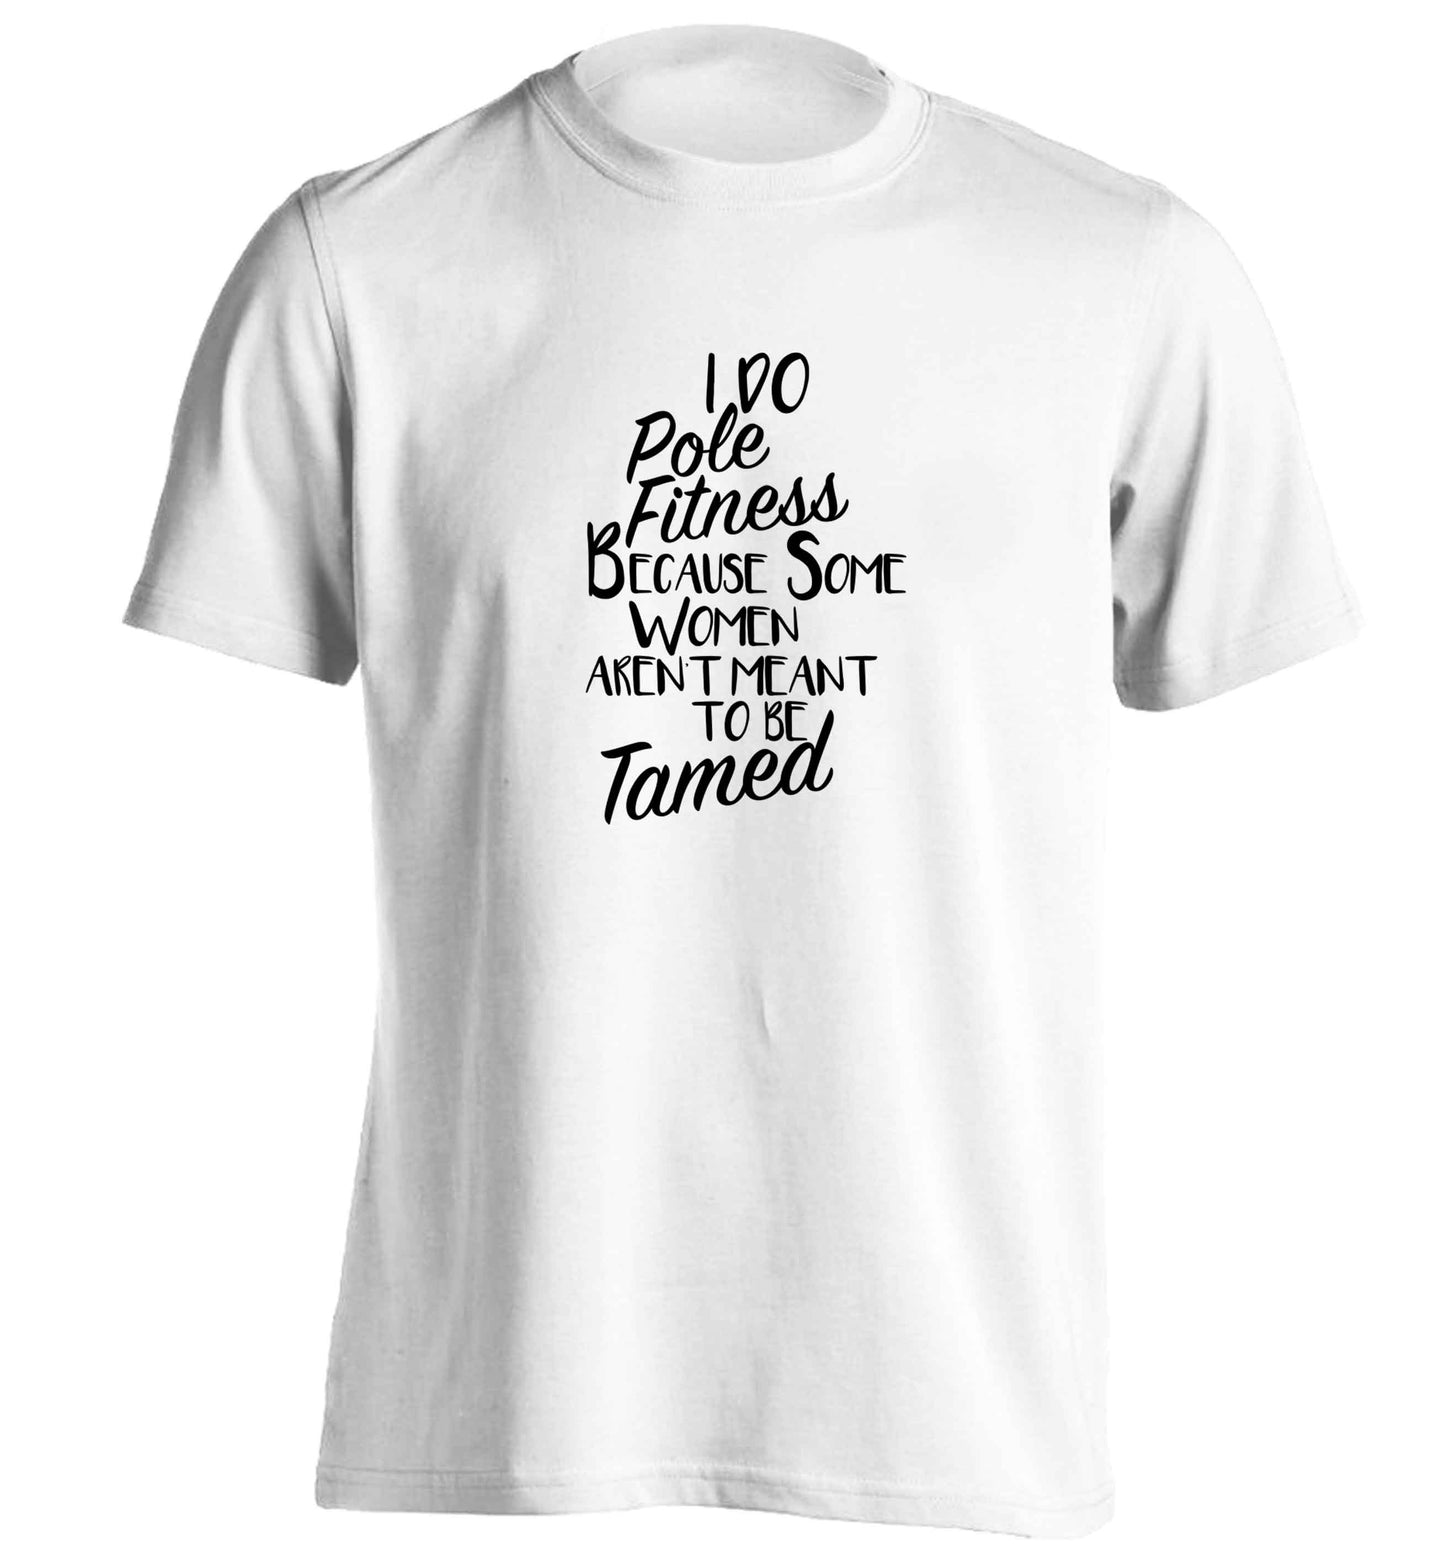 I do pole fitness because some women aren't meant to be tamed adults unisex white Tshirt 2XL